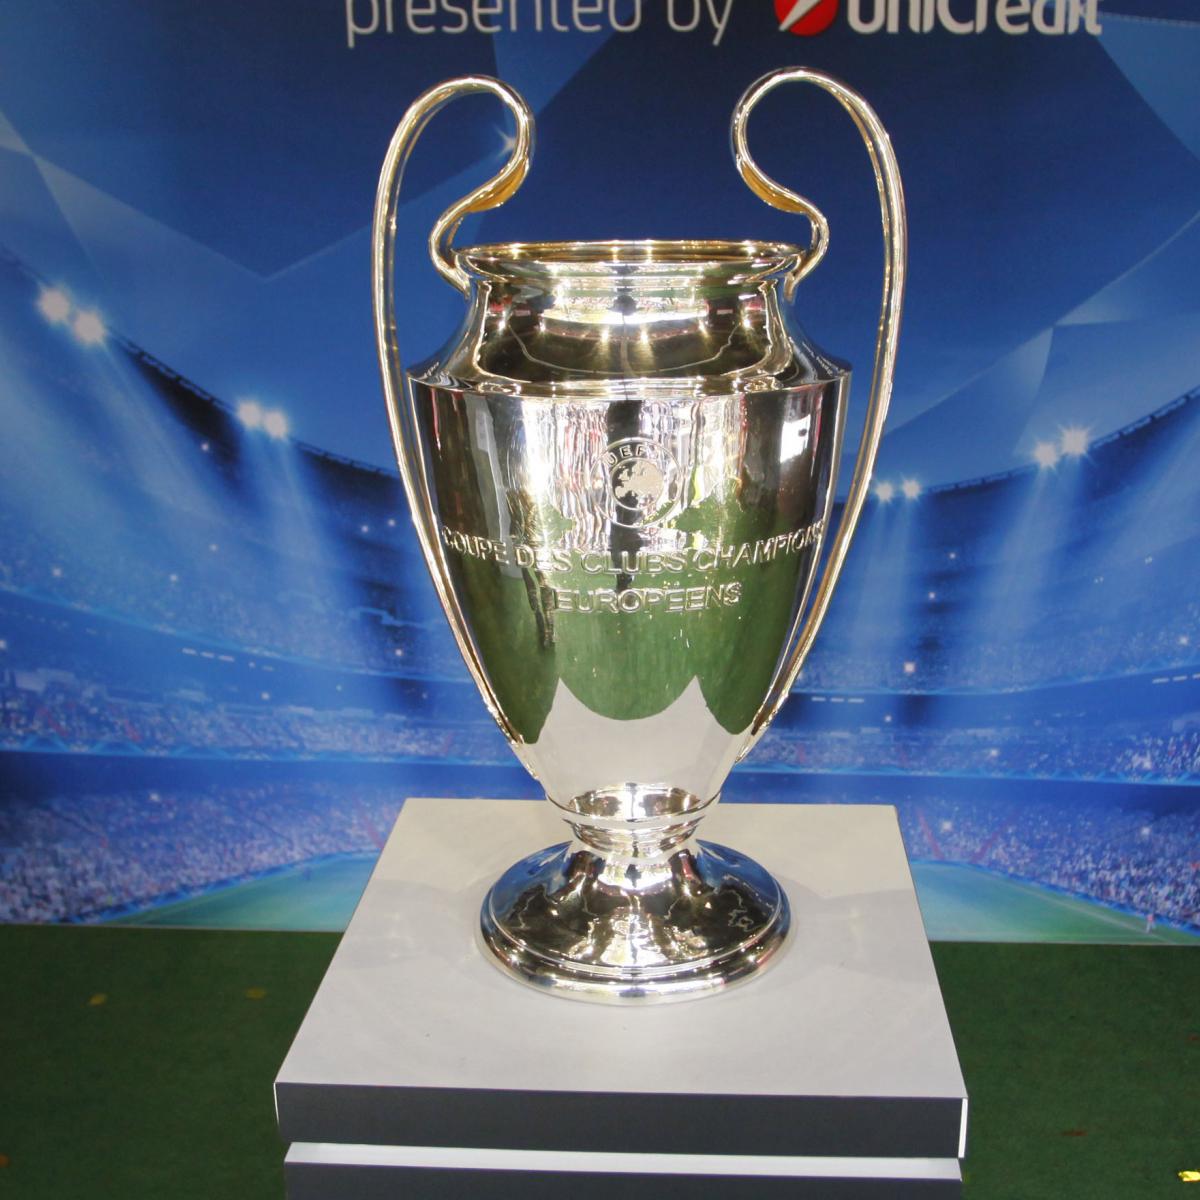 UEFA Champions League 2013: Teams That Have Qualified and ...